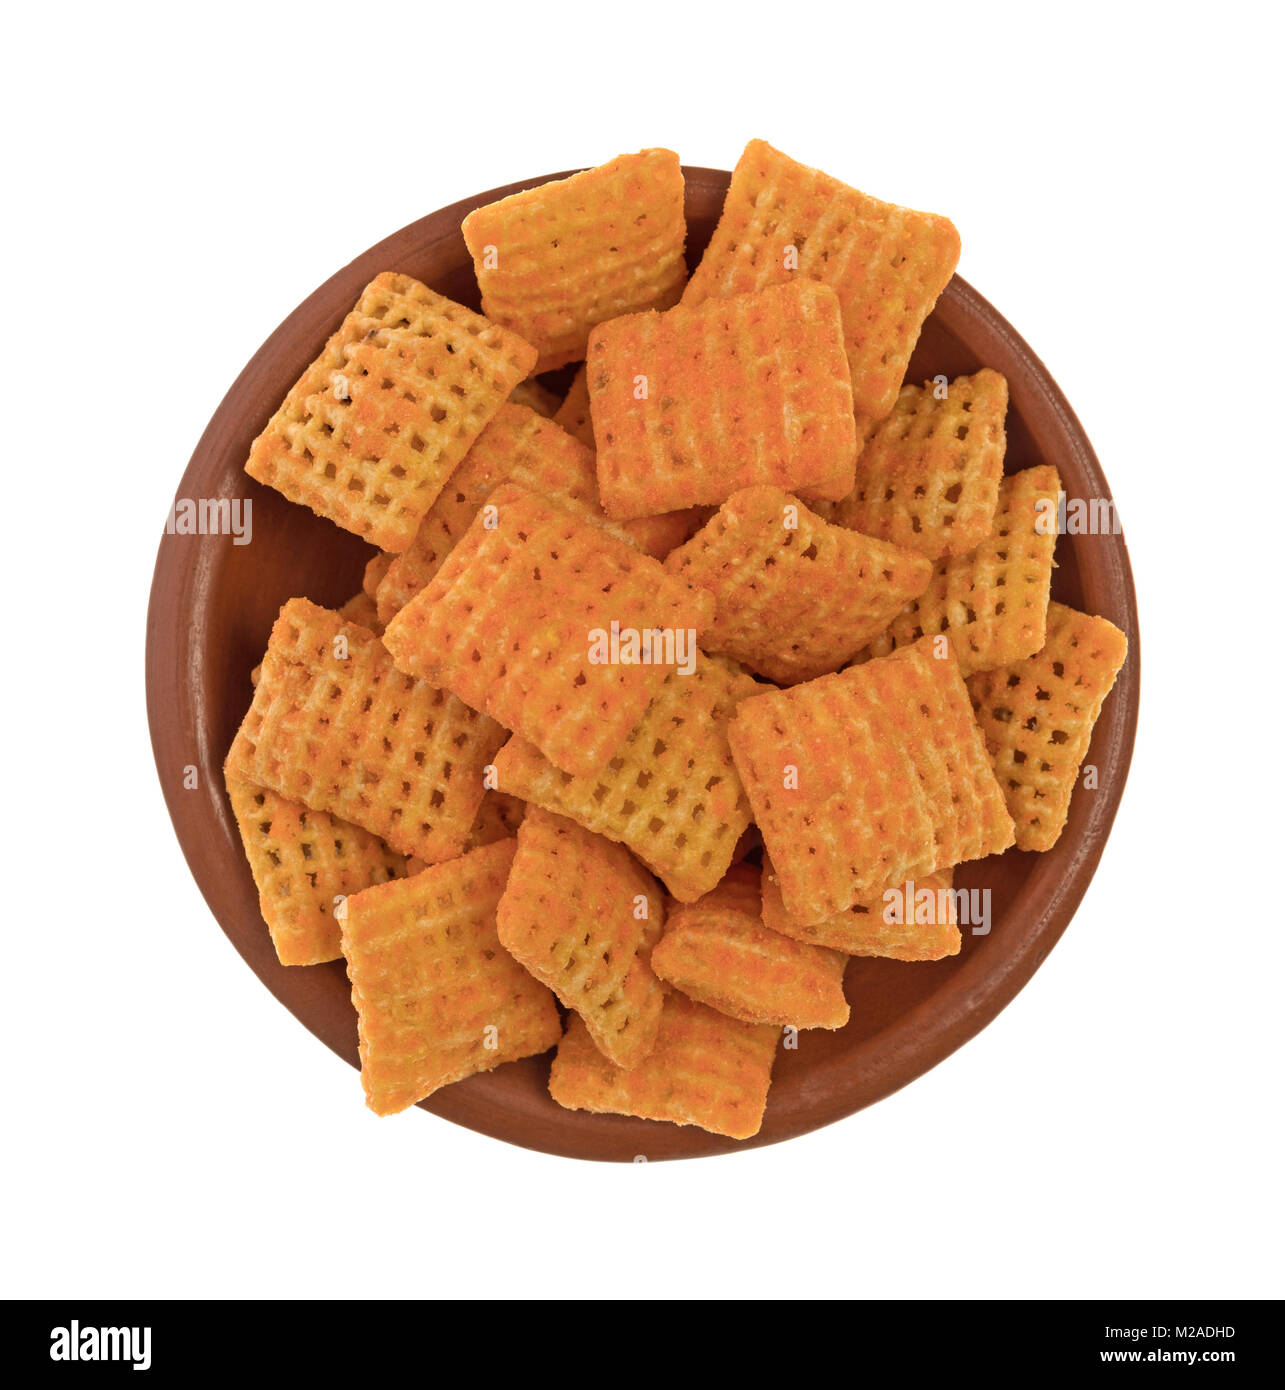 Top view of a small bowl filled with cheddar cheese flavored crispy rice crackers isolated on a white background. Stock Photo